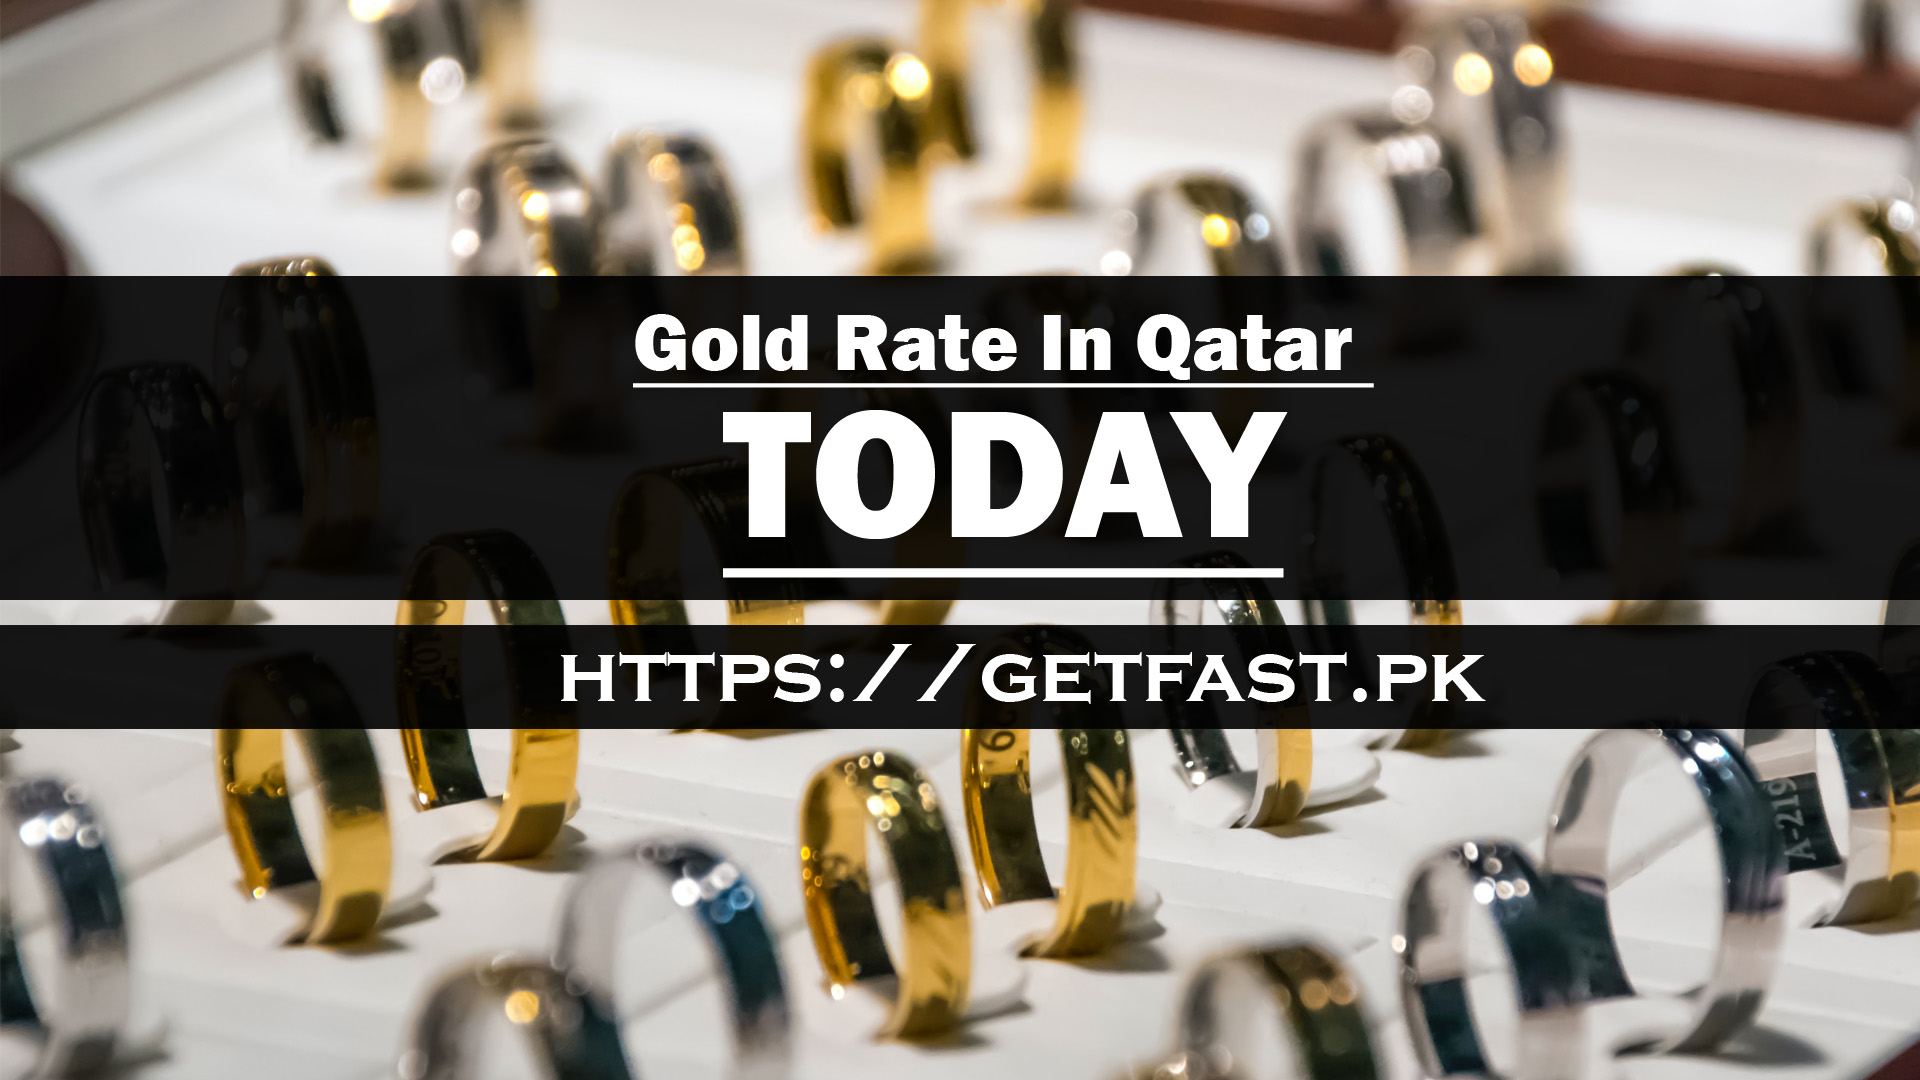 Gold Rate In Qatar Today